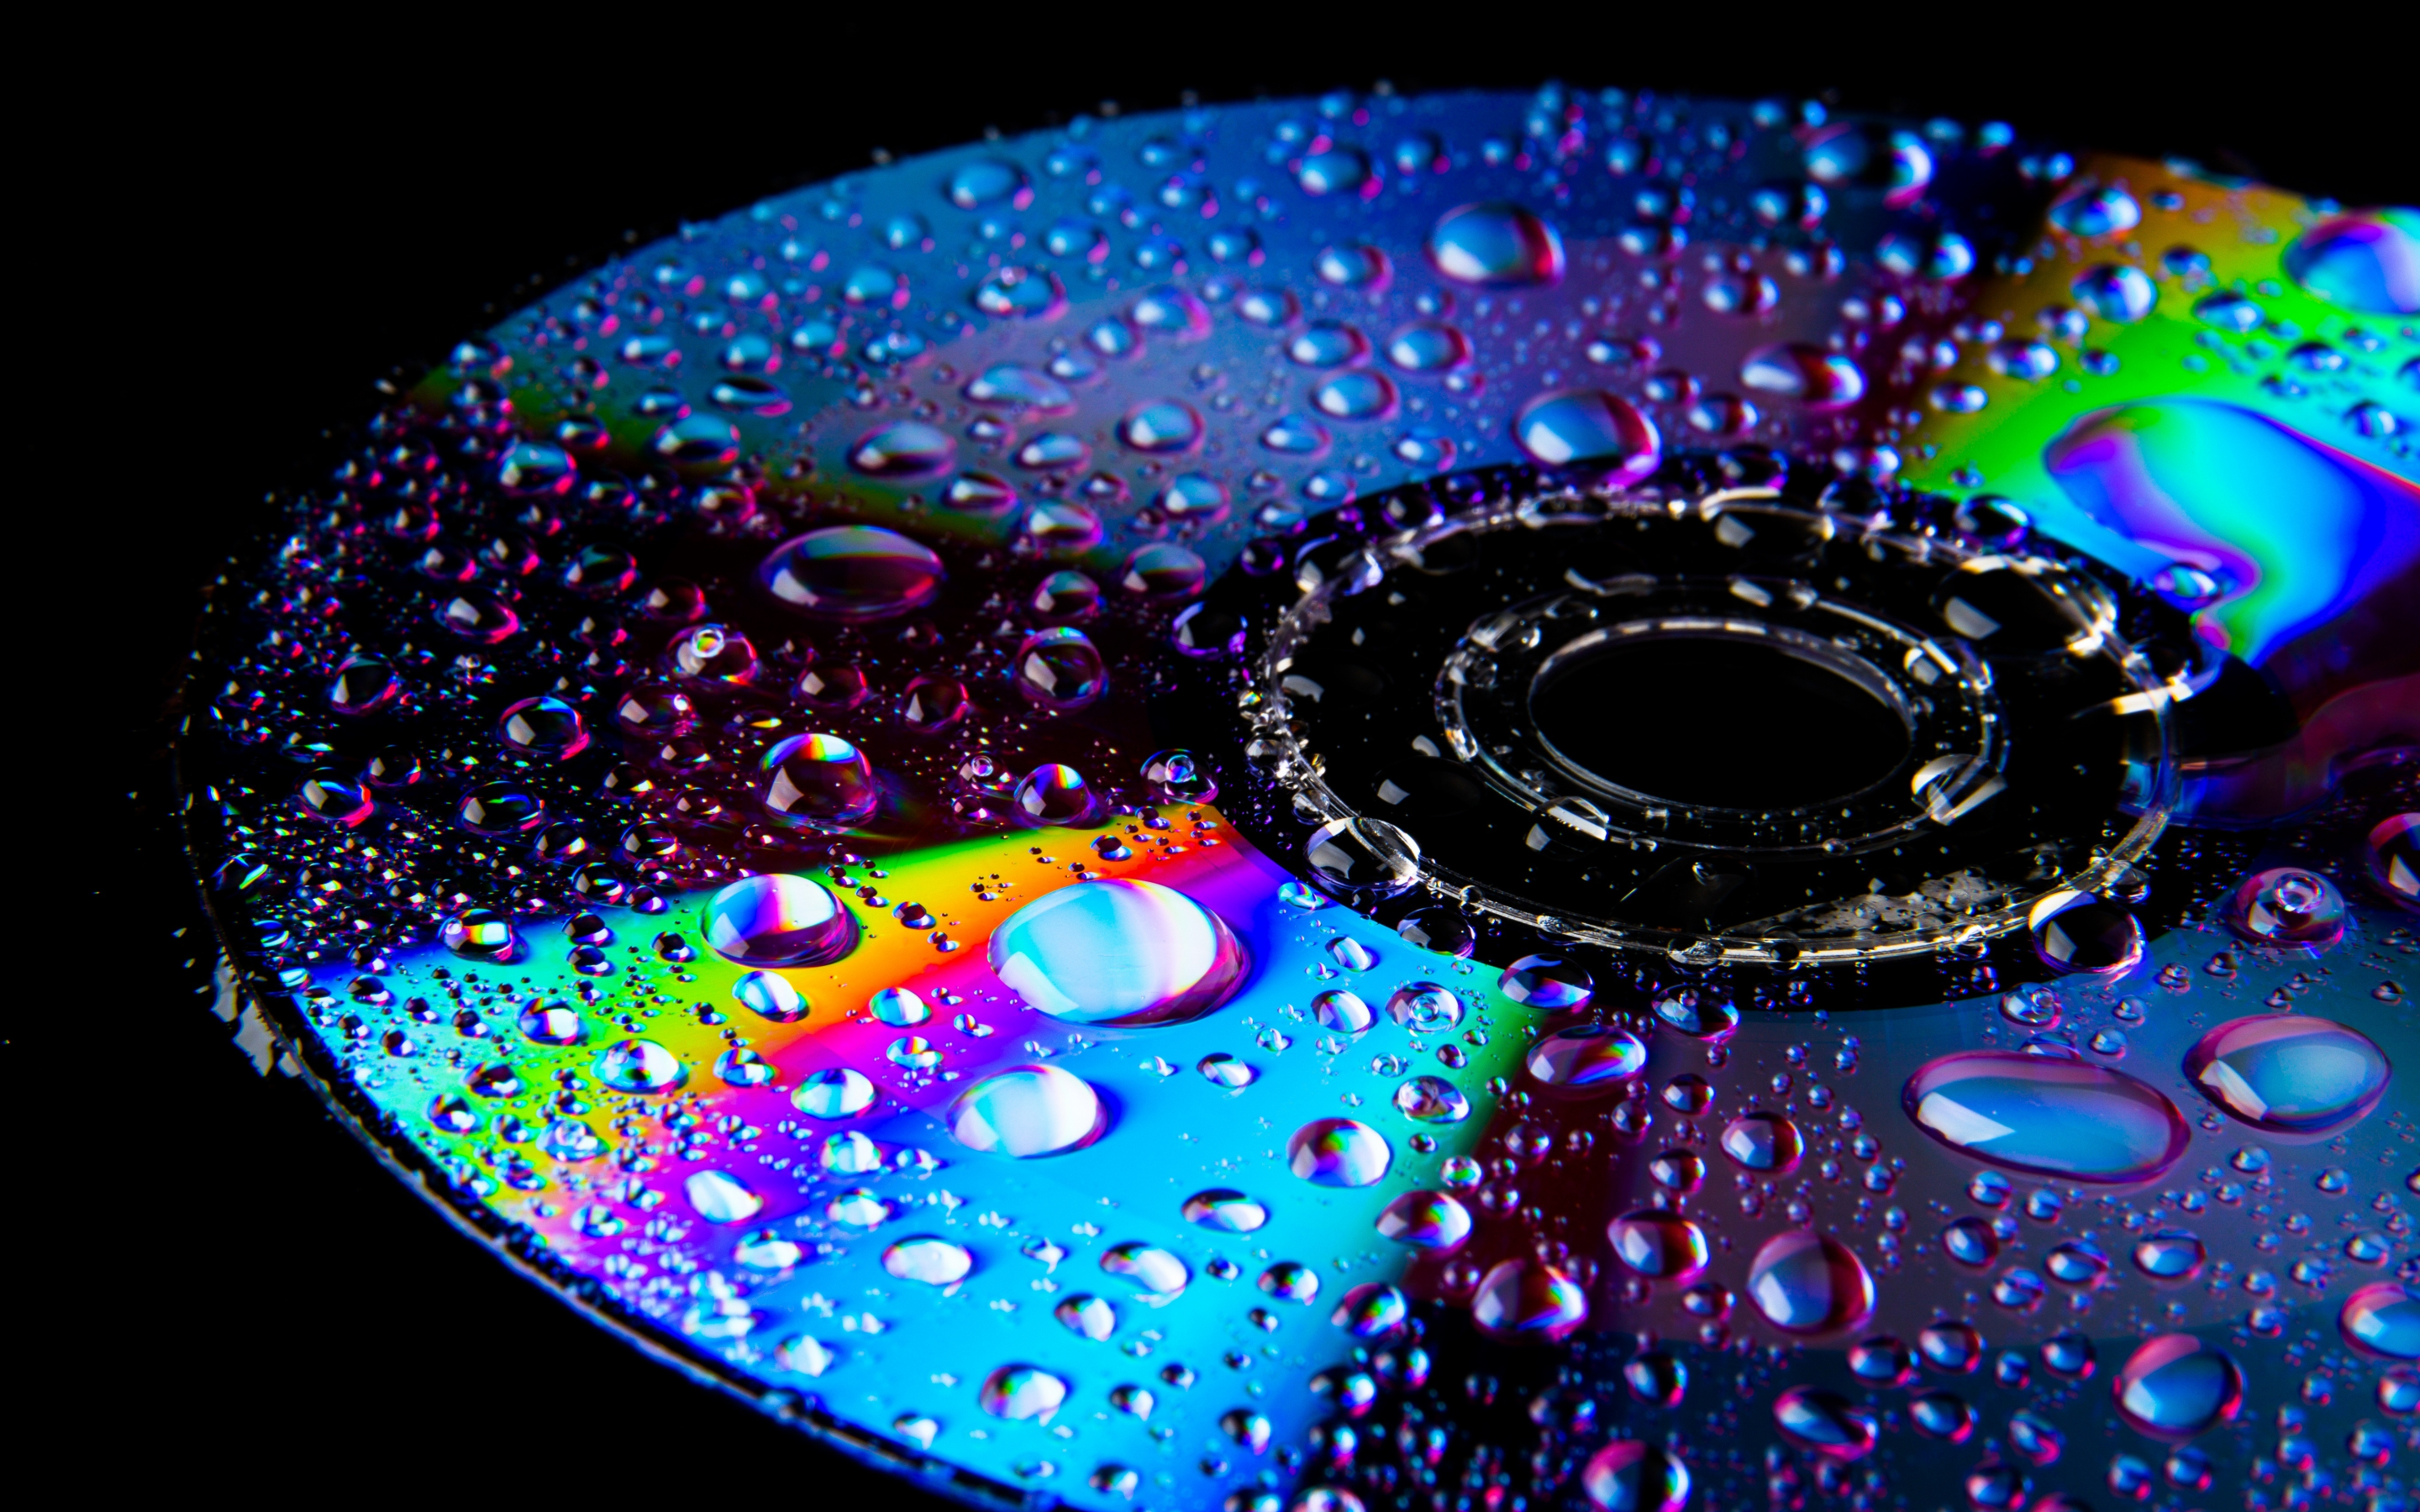 Disk, wet surface, drops, colorful, reflections, 2880x1800 wallpaper